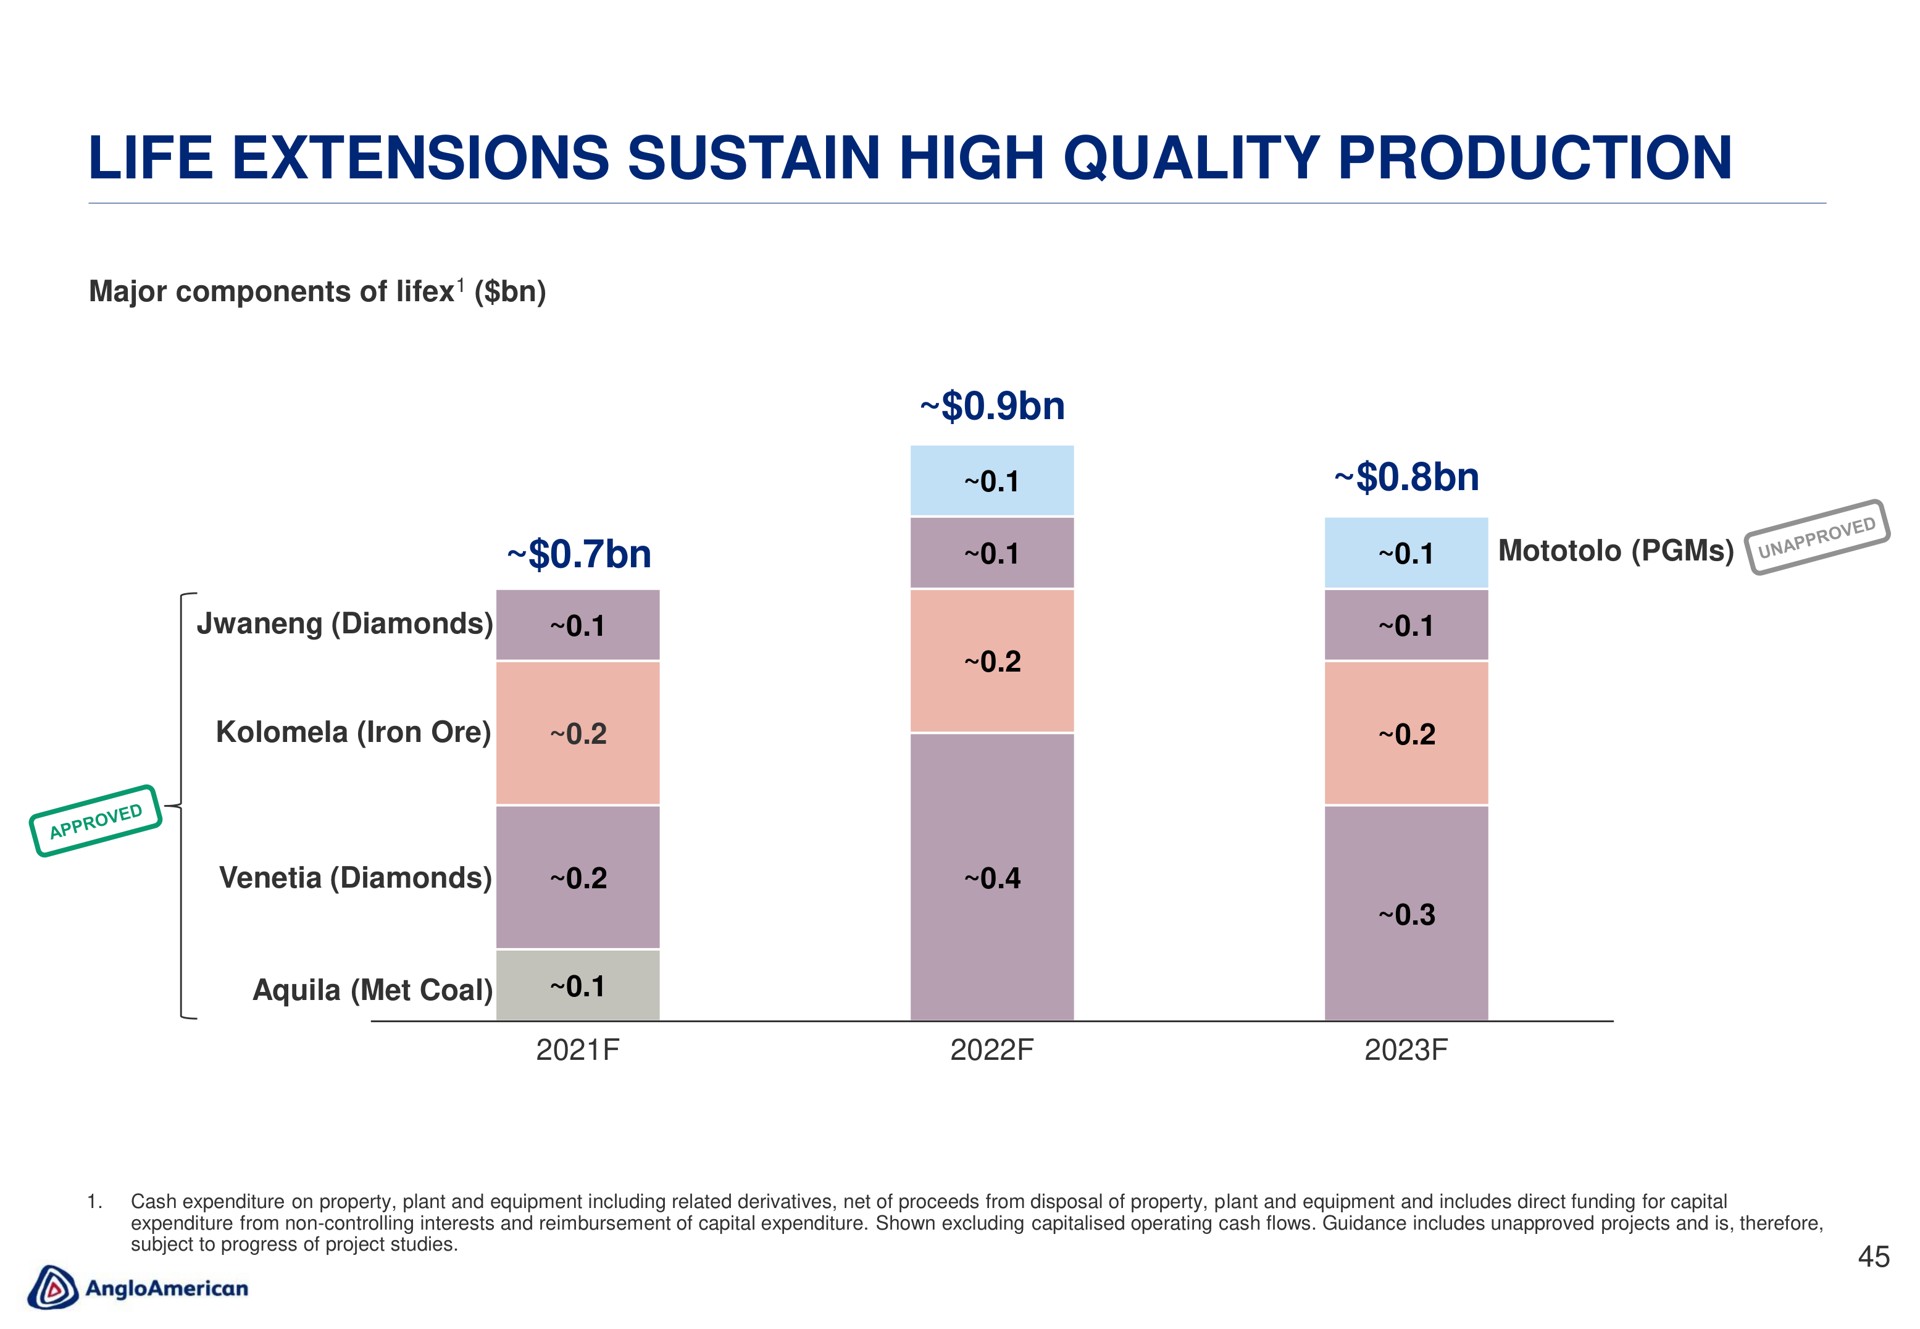 life extensions sustain high quality production | AngloAmerican